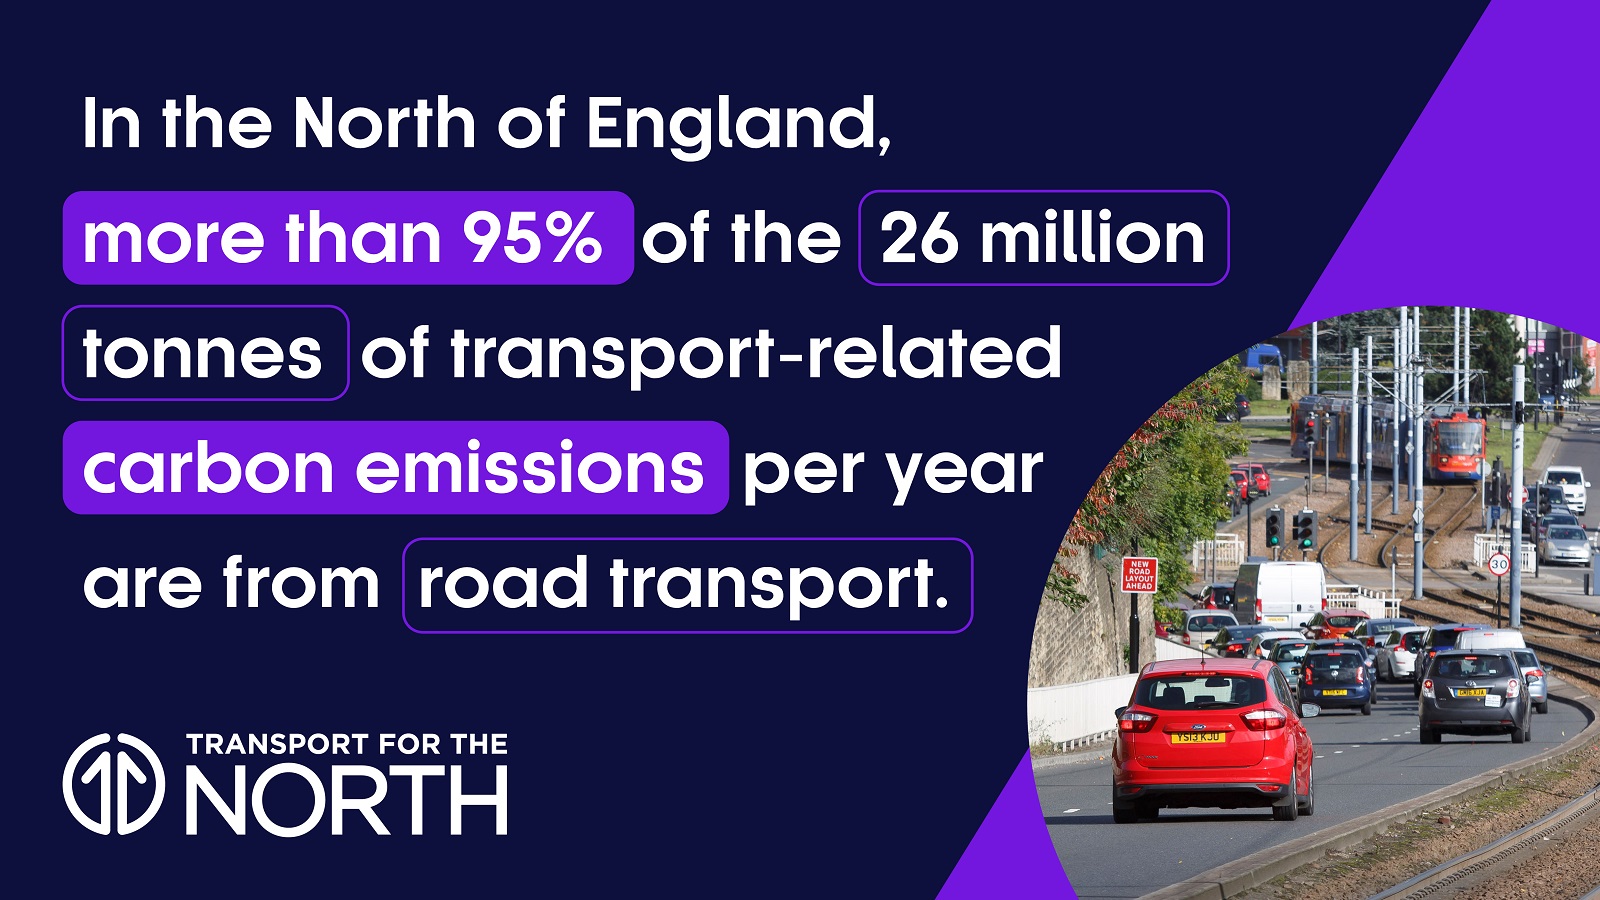 In the North of England, more than 95% of the 26 million tonnes of transport-related carbon emissions per year are from road transport